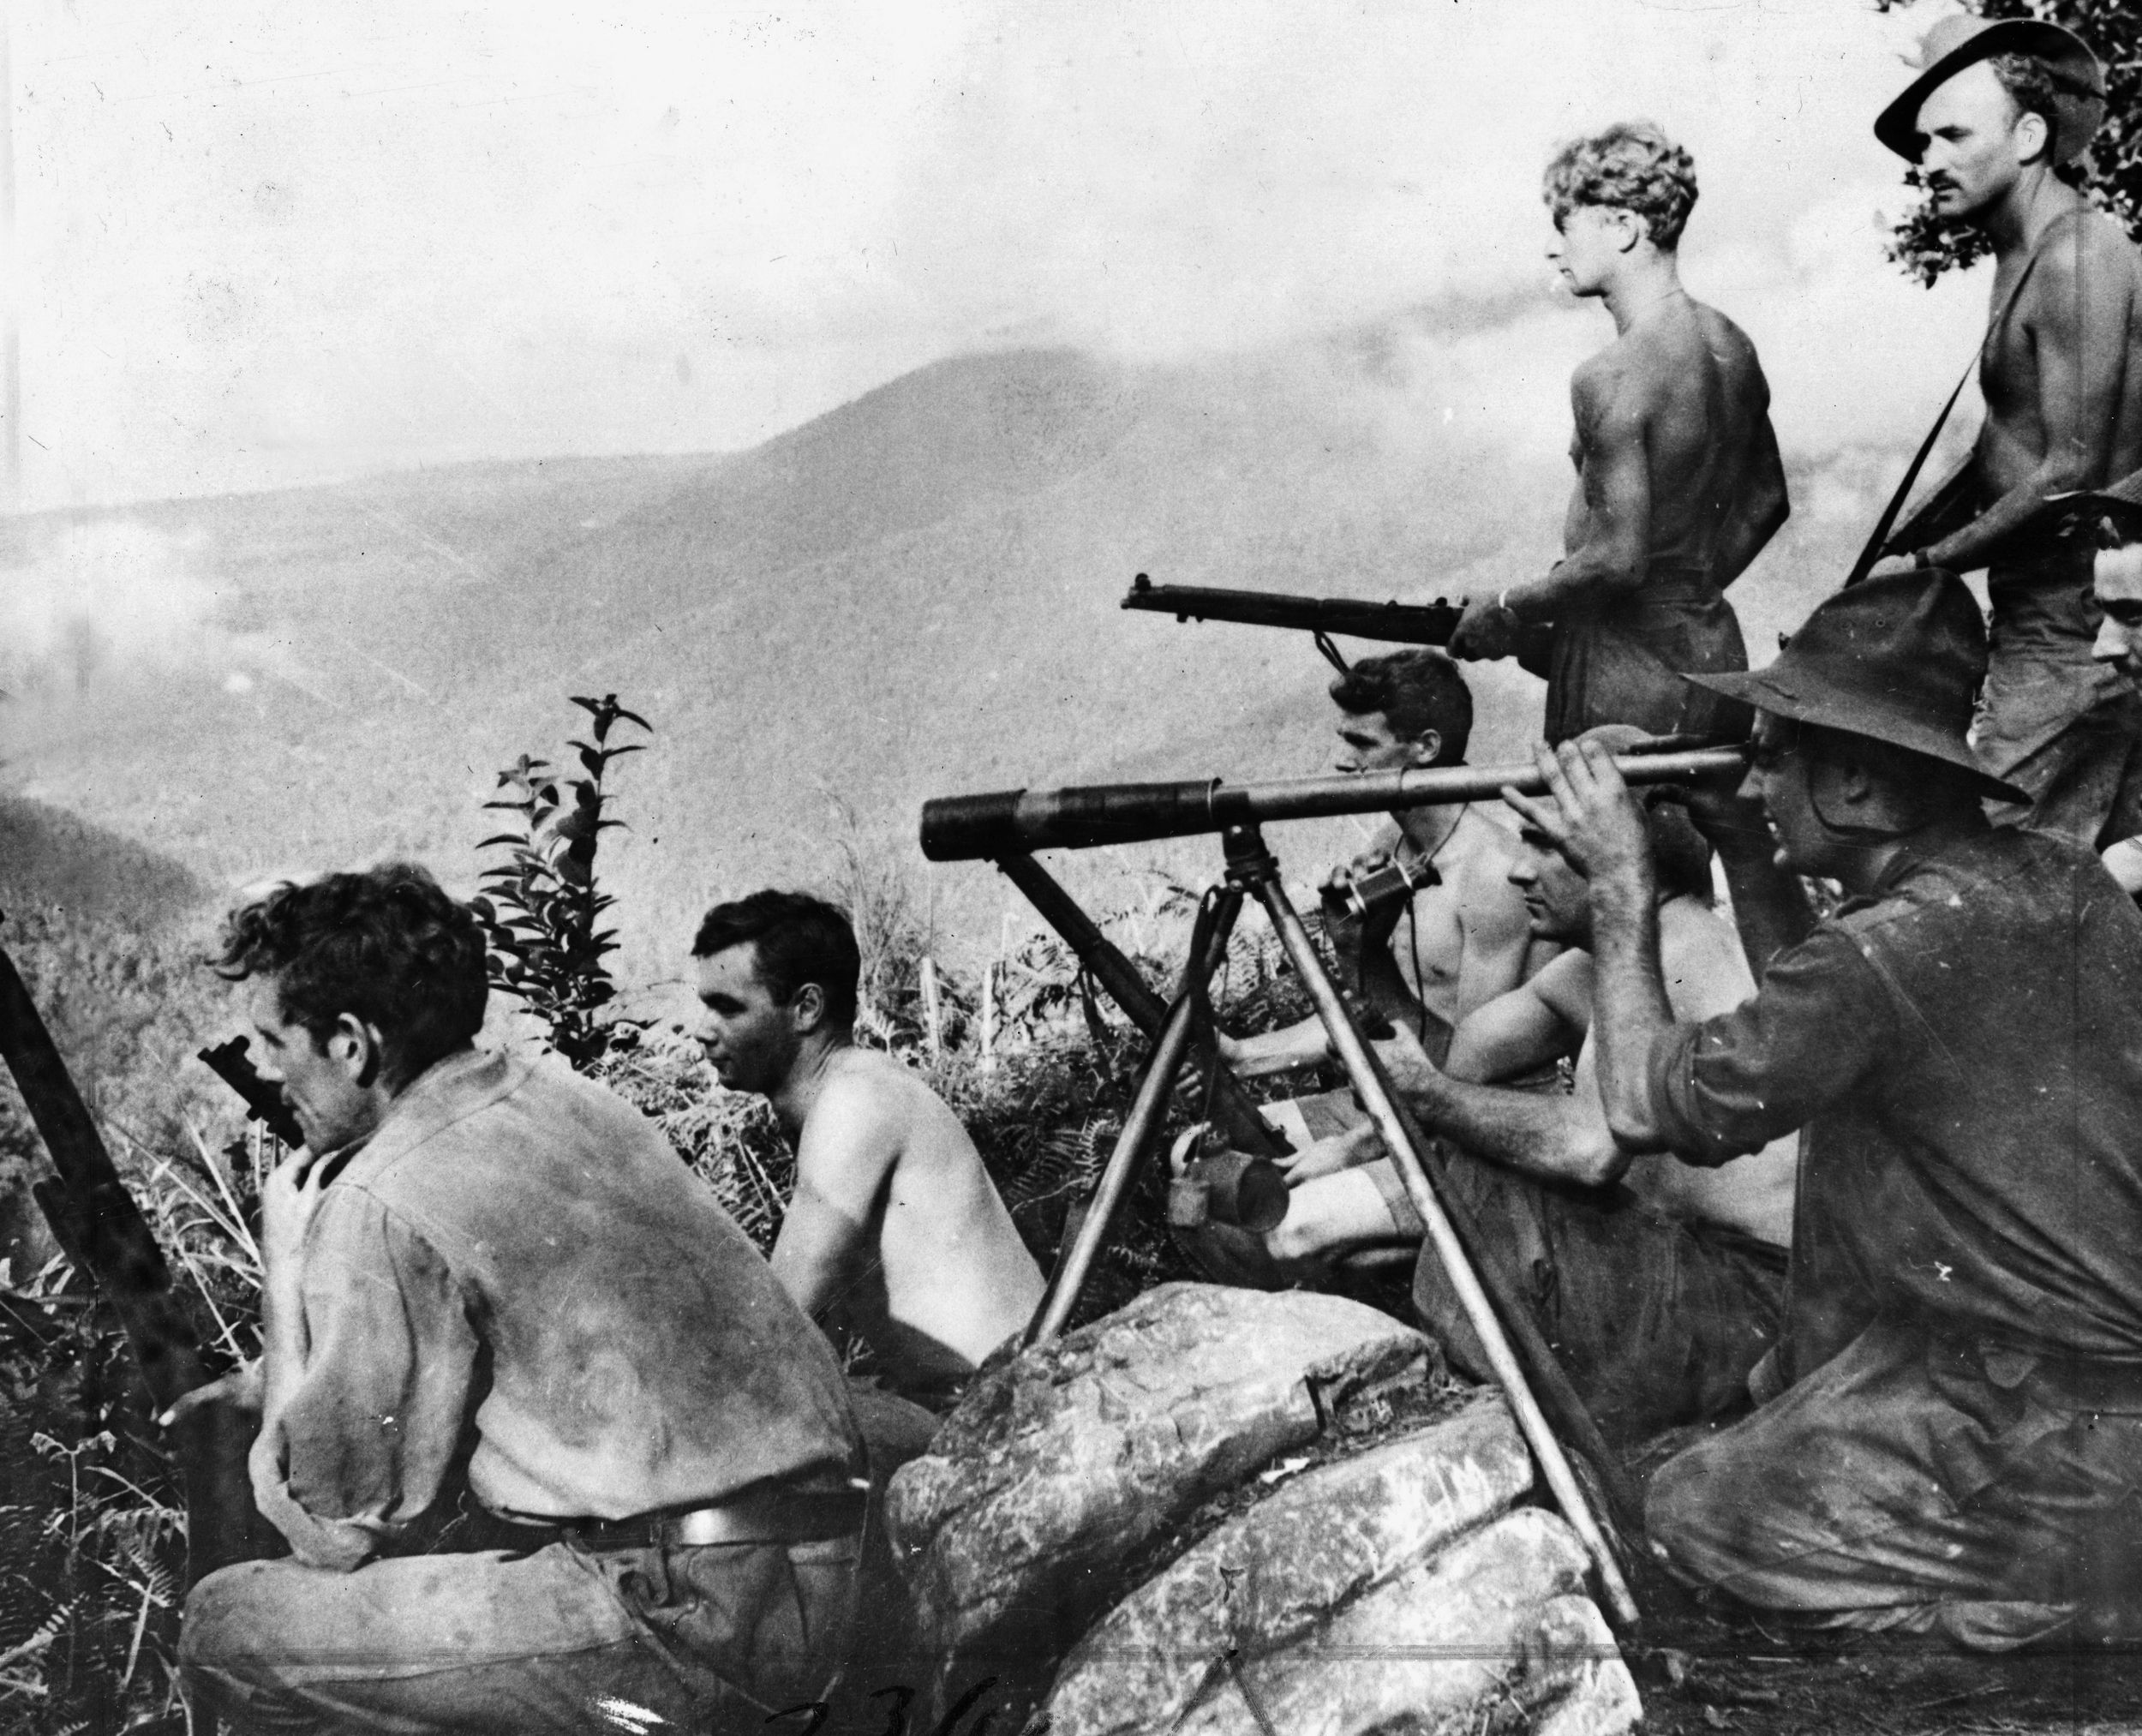  Using a telescope to view Japanese troop movements, men of the New Guinea Volunteer Rifles maintain a lookout position high in the mountains of the large island. 